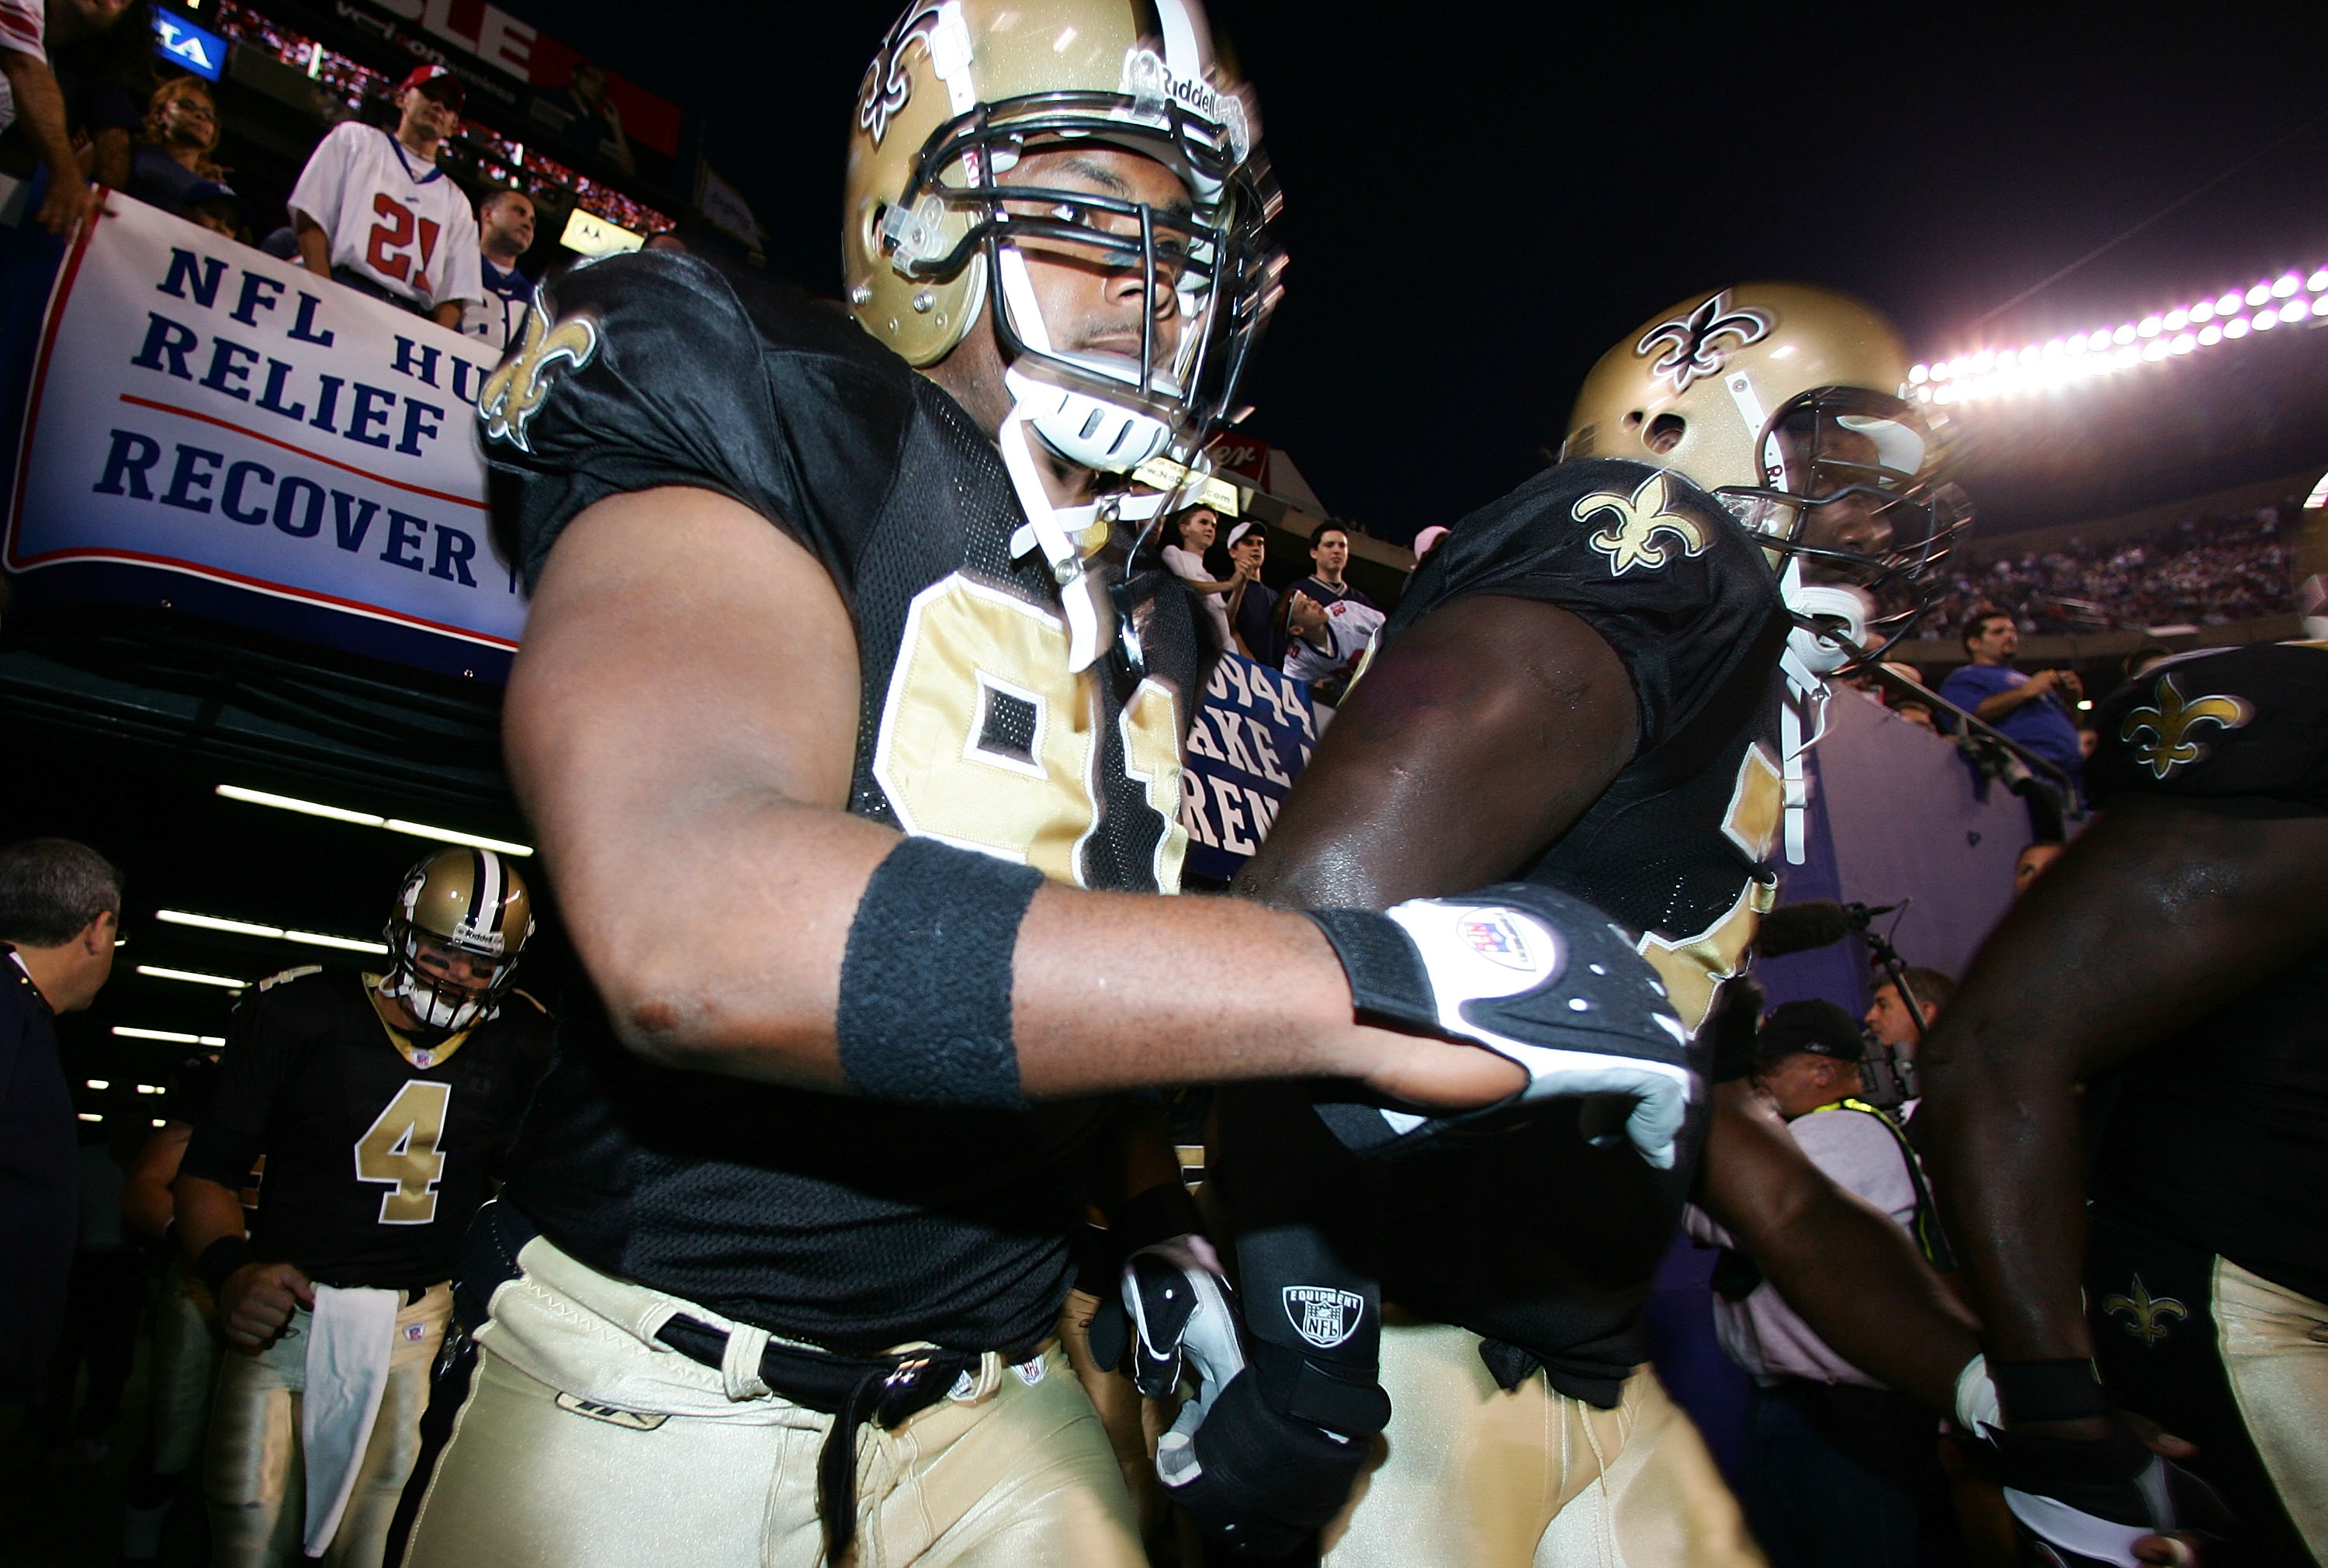 Will Smith and Jammal Brown of the New Orleans Saints take the field before the start of their game against the New York Giants on September 19, 2005 at Giants Stadium in East Rutherford, New Jersey. (Al Bello&mdash;Getty Images)